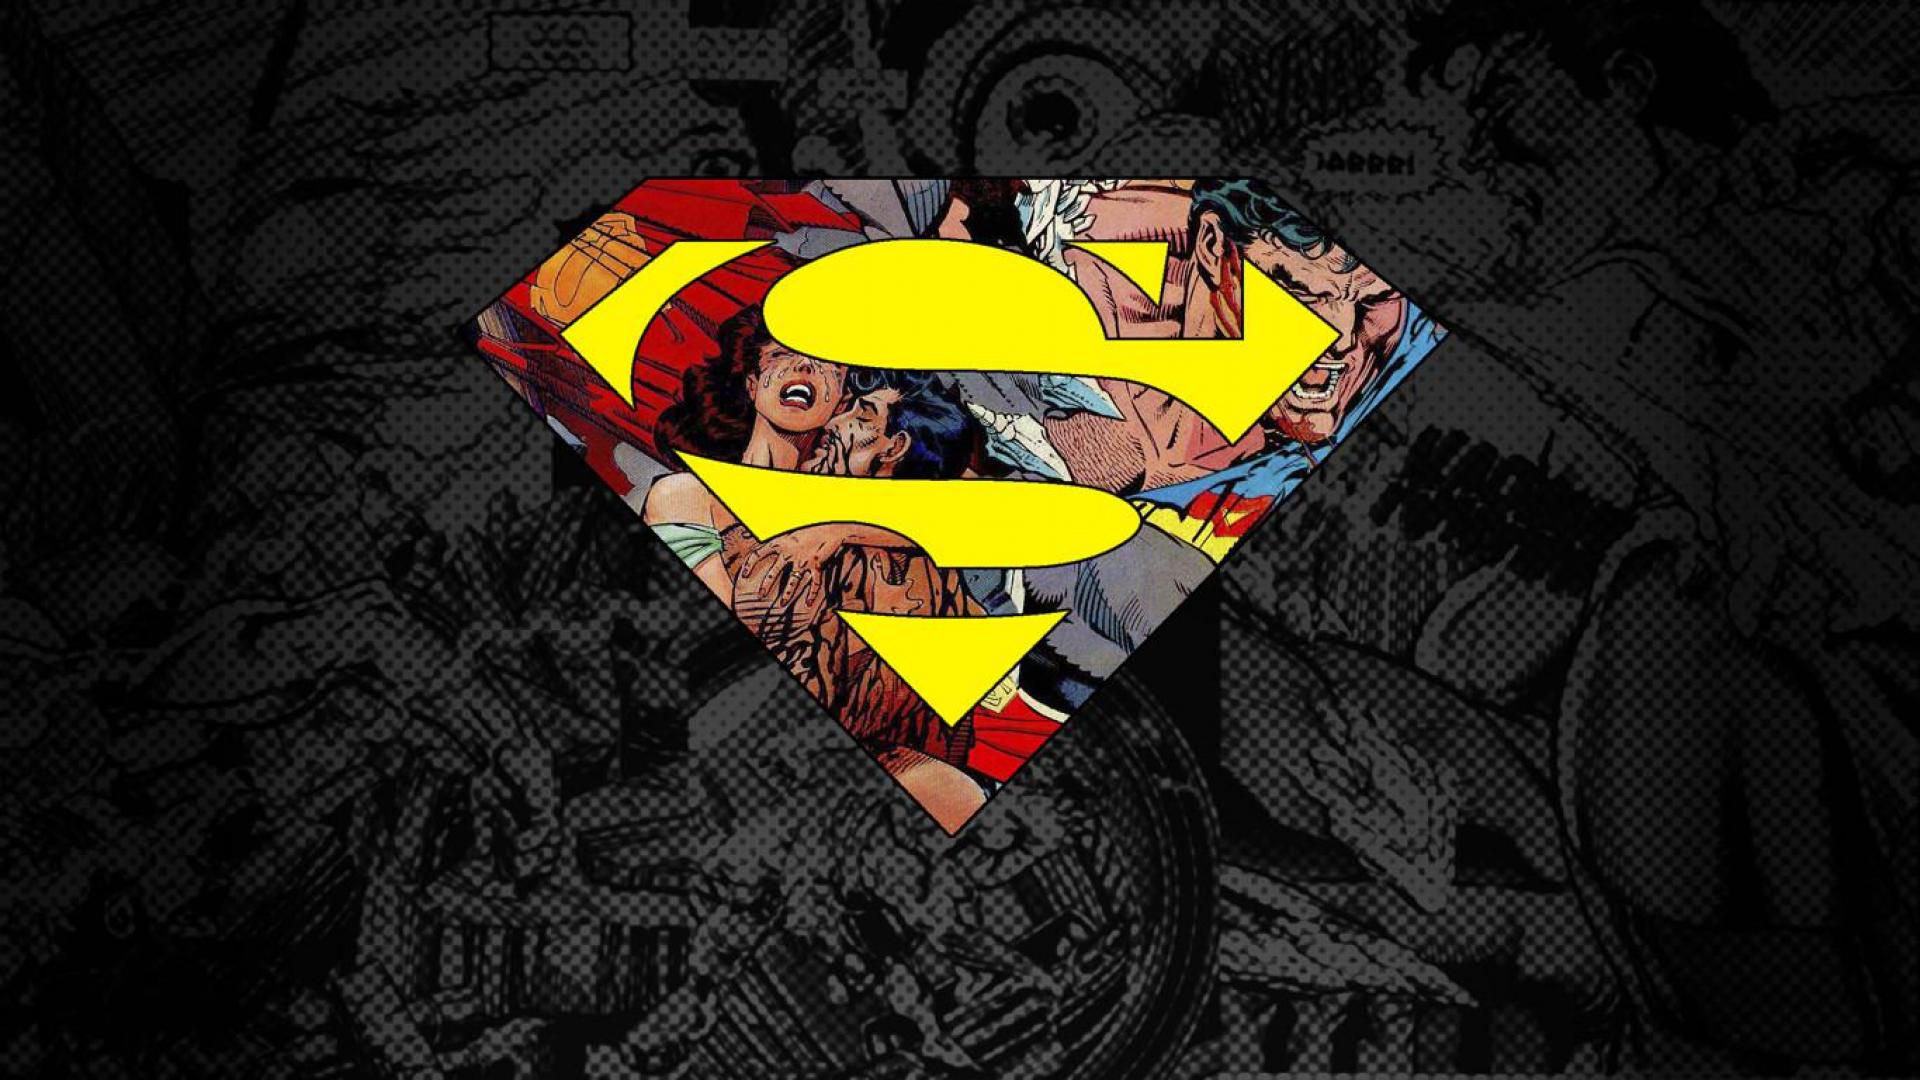 Superman - (#152886) - High Quality and Resolution Wallpapers on ...